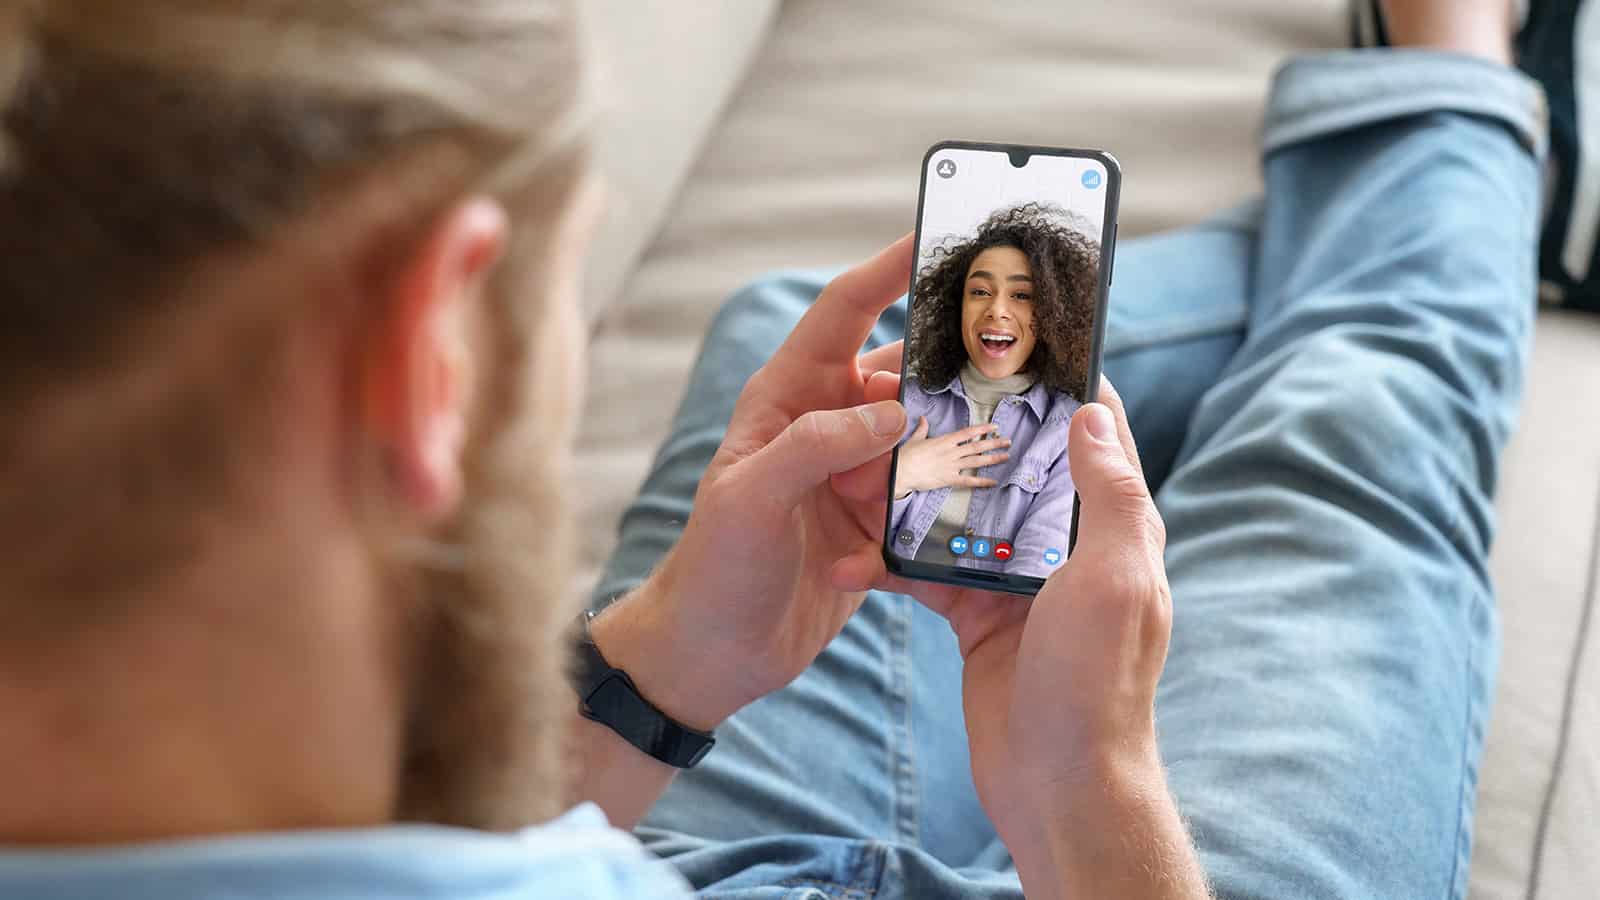 New Study Perfectly Explains How Video Dating Changed the Rules of Romance